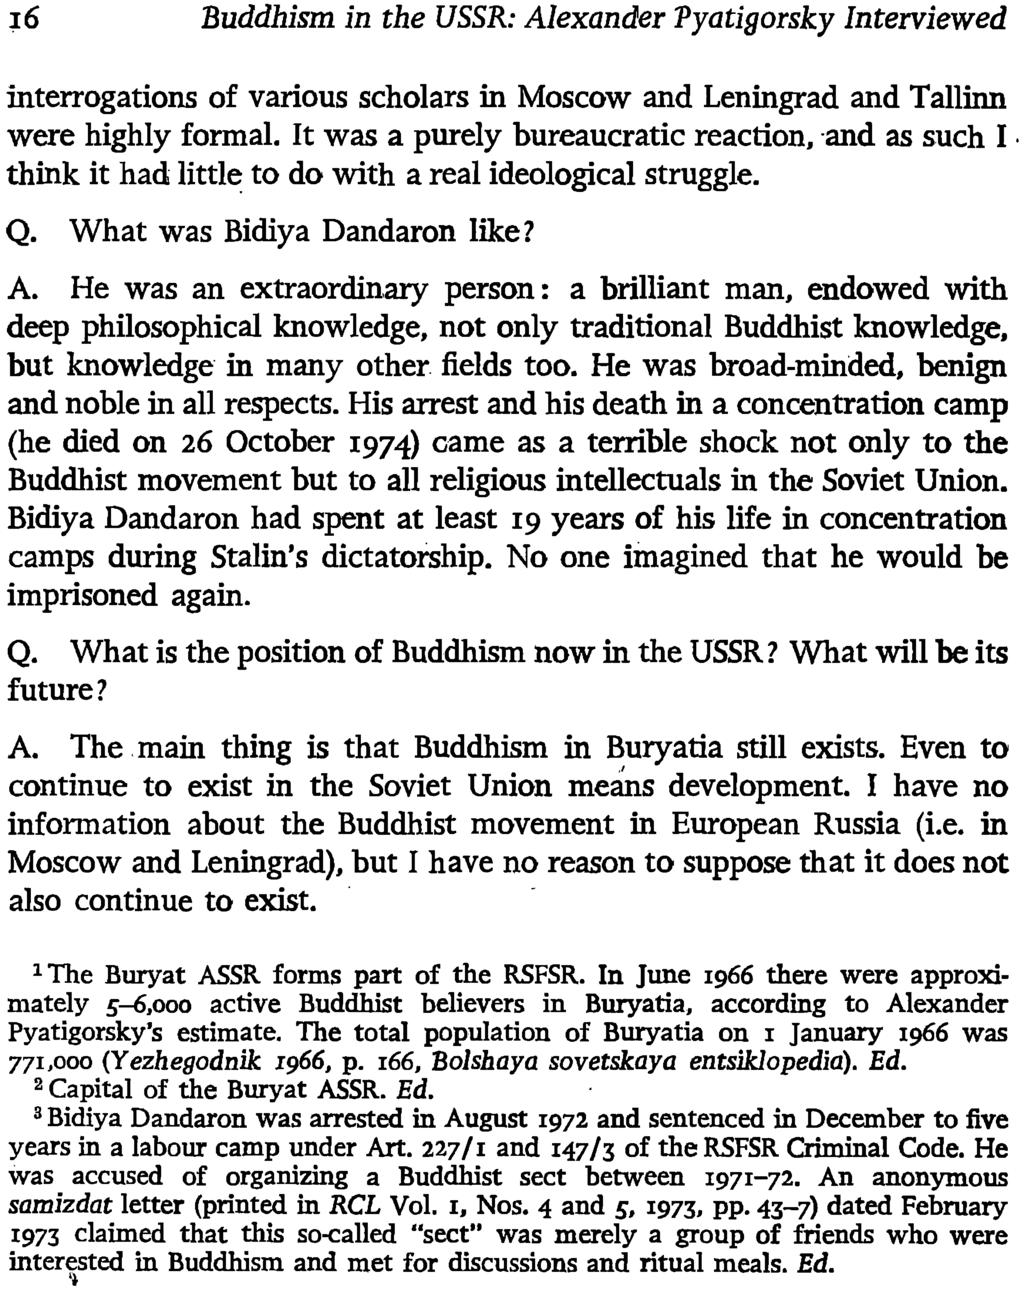 16 Buddhism in the USSR: Alexander Pyatiyorsky Interviewed interrogations of various scholars in Moscow and Leningrad and Tallinn were highly formal.